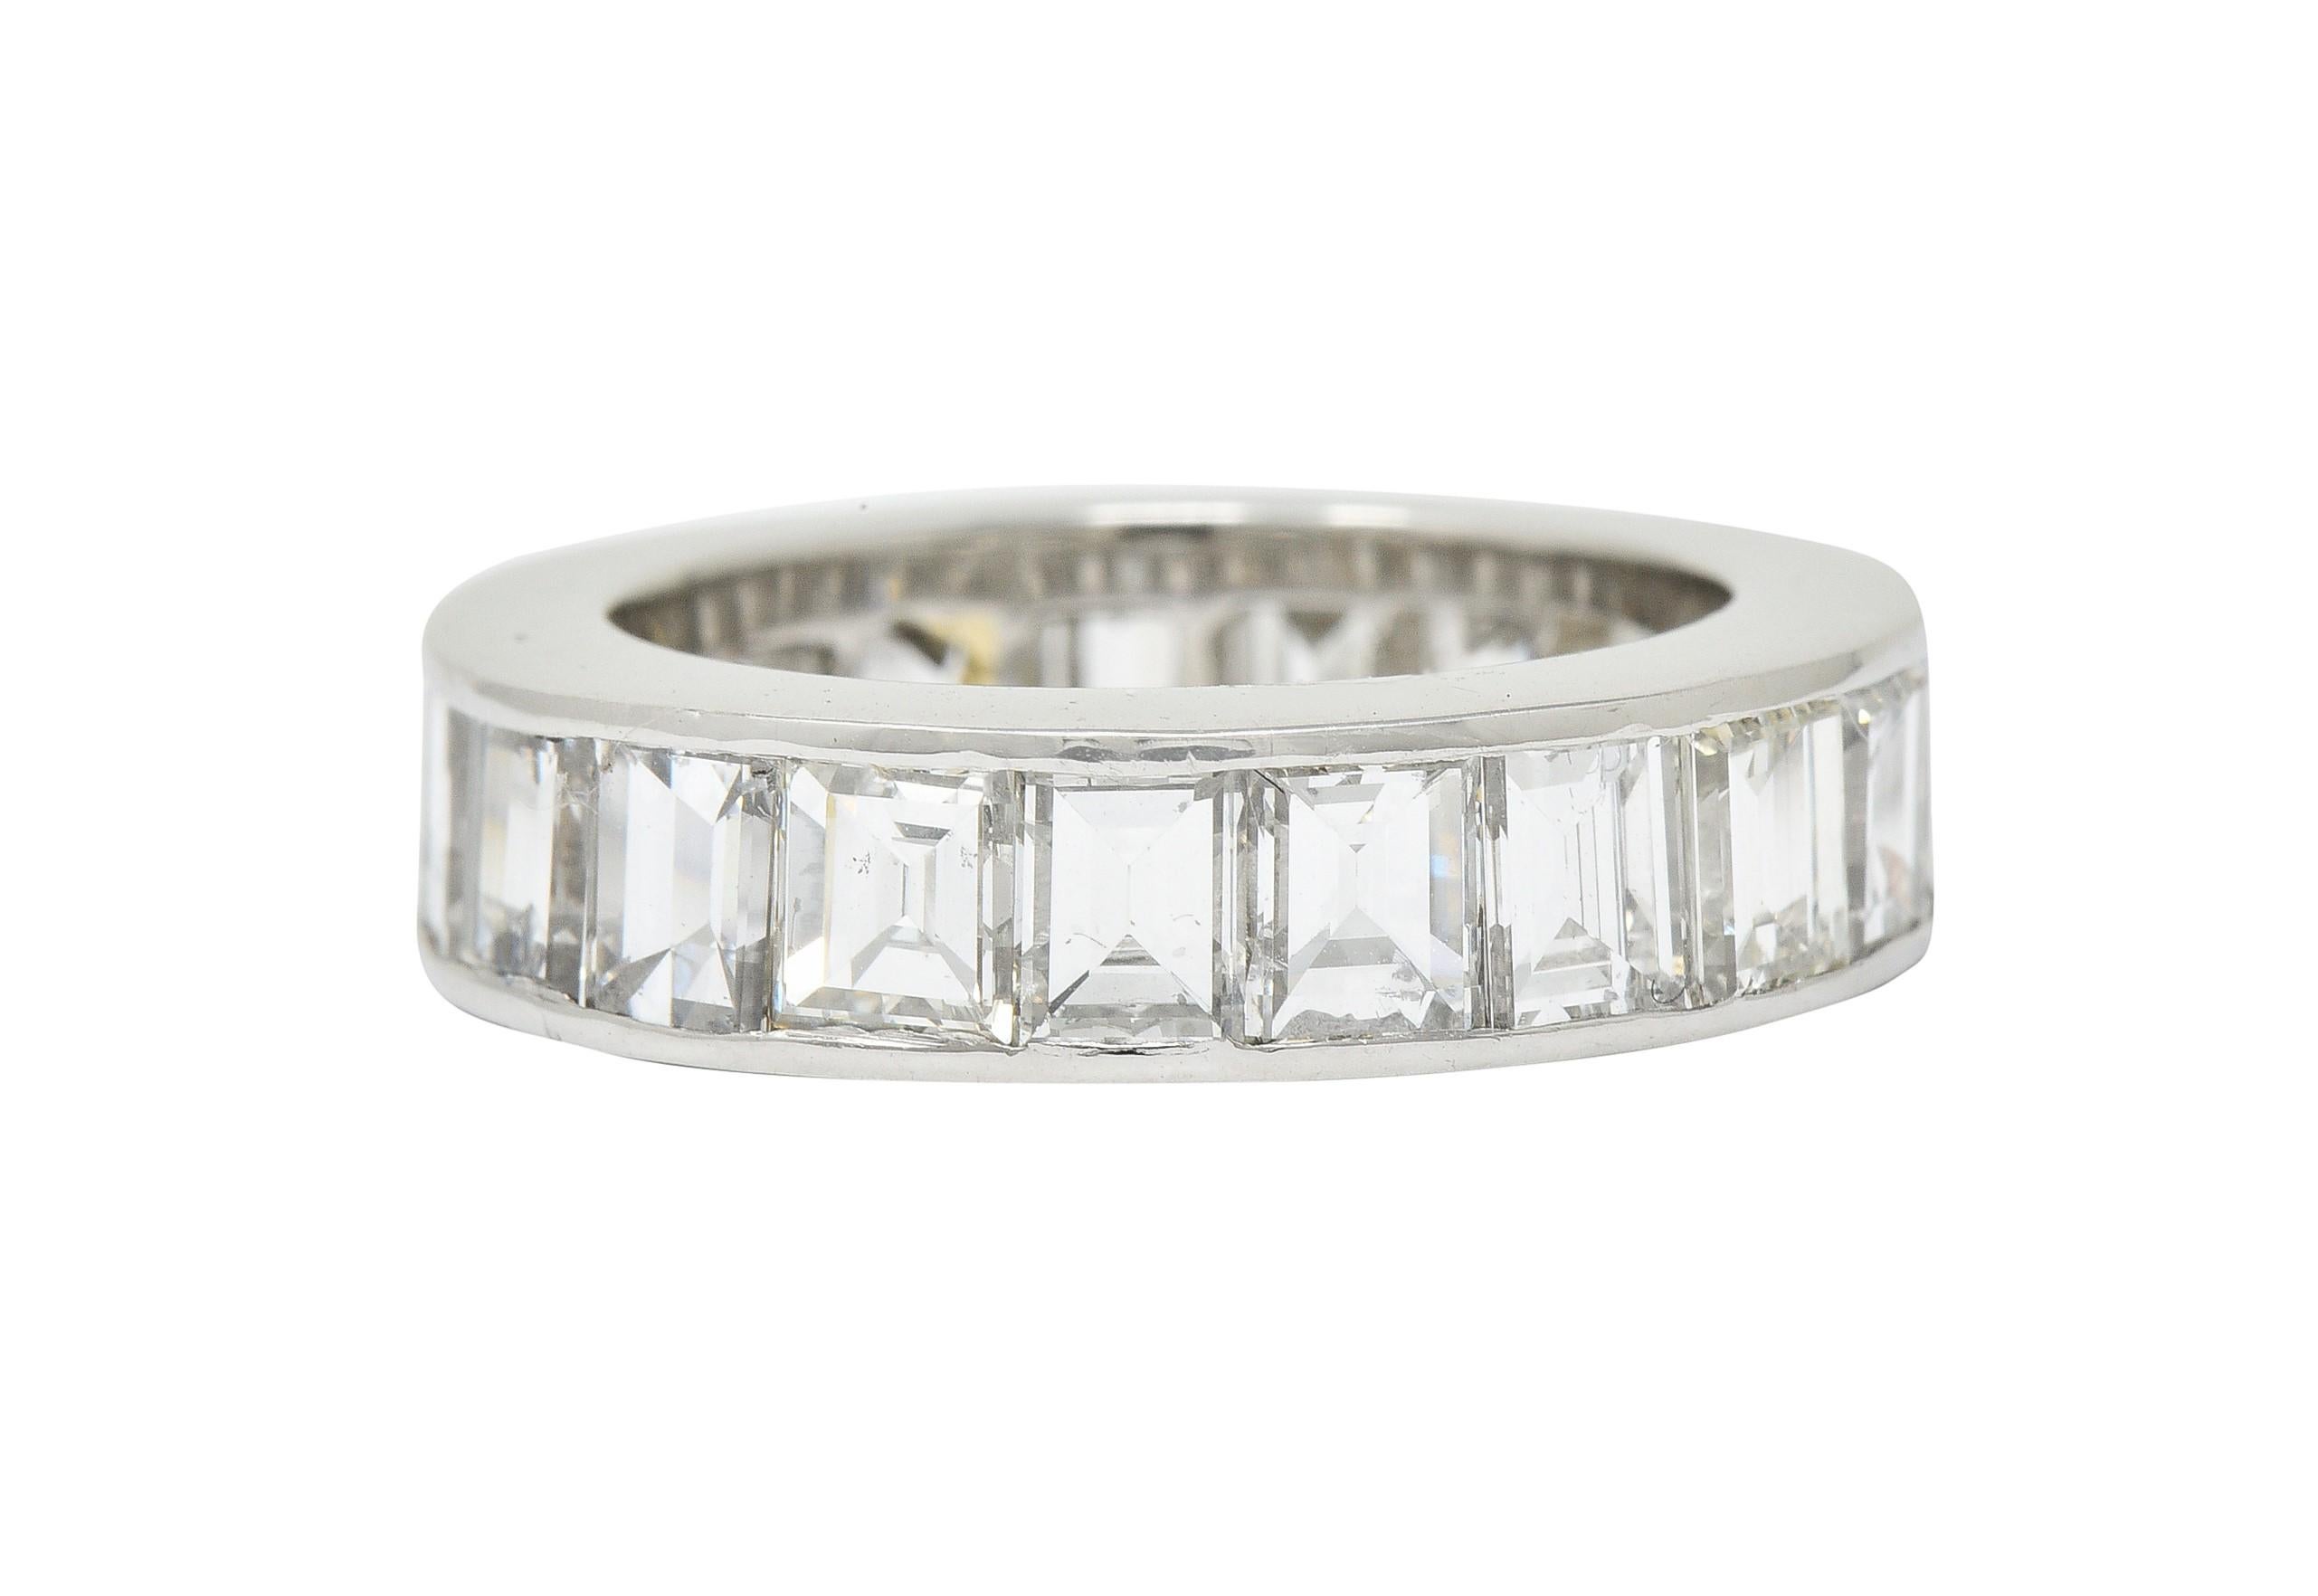 Eternity band ring channel set fully around with rectangular and square step cut diamonds

Weighing in total approximately 8.50 carats with H to J color and VS clarity

Completed by polished channel walls

Stamped PLAT for platinum

Circa: